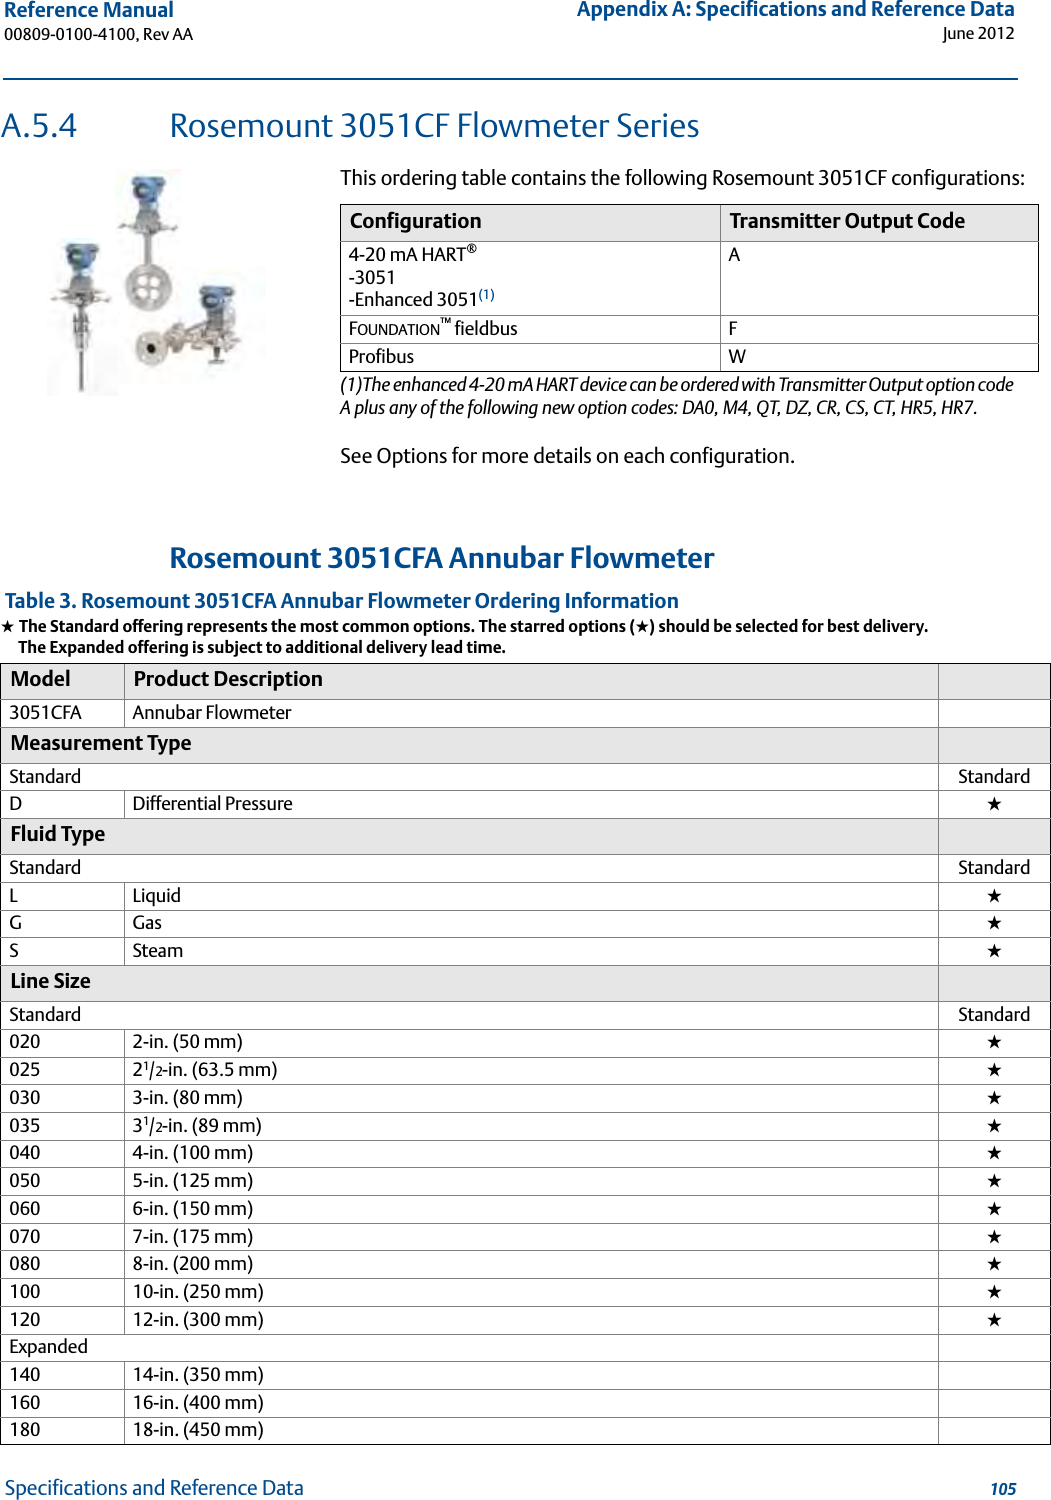 105Reference Manual 00809-0100-4100, Rev AAAppendix A: Specifications and Reference DataJune 2012Specifications and Reference DataA.5.4 Rosemount 3051CF Flowmeter SeriesRosemount 3051CFA Annubar Flowmeter Table 3. Rosemount 3051CFA Annubar Flowmeter Ordering Information★ The Standard offering represents the most common options. The starred options (★) should be selected for best delivery.__The Expanded offering is subject to additional delivery lead time.Model Product Description3051CFA Annubar FlowmeterMeasurement TypeStandard StandardDDifferential Pressure  ★Fluid TypeStandard StandardLLiquid ★GGas ★SSteam ★Line SizeStandard Standard020 2-in. (50 mm) ★025 21/2-in. (63.5 mm) ★030 3-in. (80 mm) ★035 31/2-in. (89 mm) ★040 4-in. (100 mm) ★050 5-in. (125 mm) ★060 6-in. (150 mm) ★070 7-in. (175 mm) ★080 8-in. (200 mm) ★100 10-in. (250 mm) ★120 12-in. (300 mm) ★Expanded140 14-in. (350 mm)160 16-in. (400 mm)180 18-in. (450 mm)This ordering table contains the following Rosemount 3051CF configurations:See Options for more details on each configuration. Configuration Transmitter Output Code4-20 mA HART®-3051-Enhanced 3051(1)(1)The enhanced 4-20 mA HART device can be ordered with Transmitter Output option code A plus any of the following new option codes: DA0, M4, QT, DZ, CR, CS, CT, HR5, HR7.AFOUNDATION™ fieldbus FProfibus W